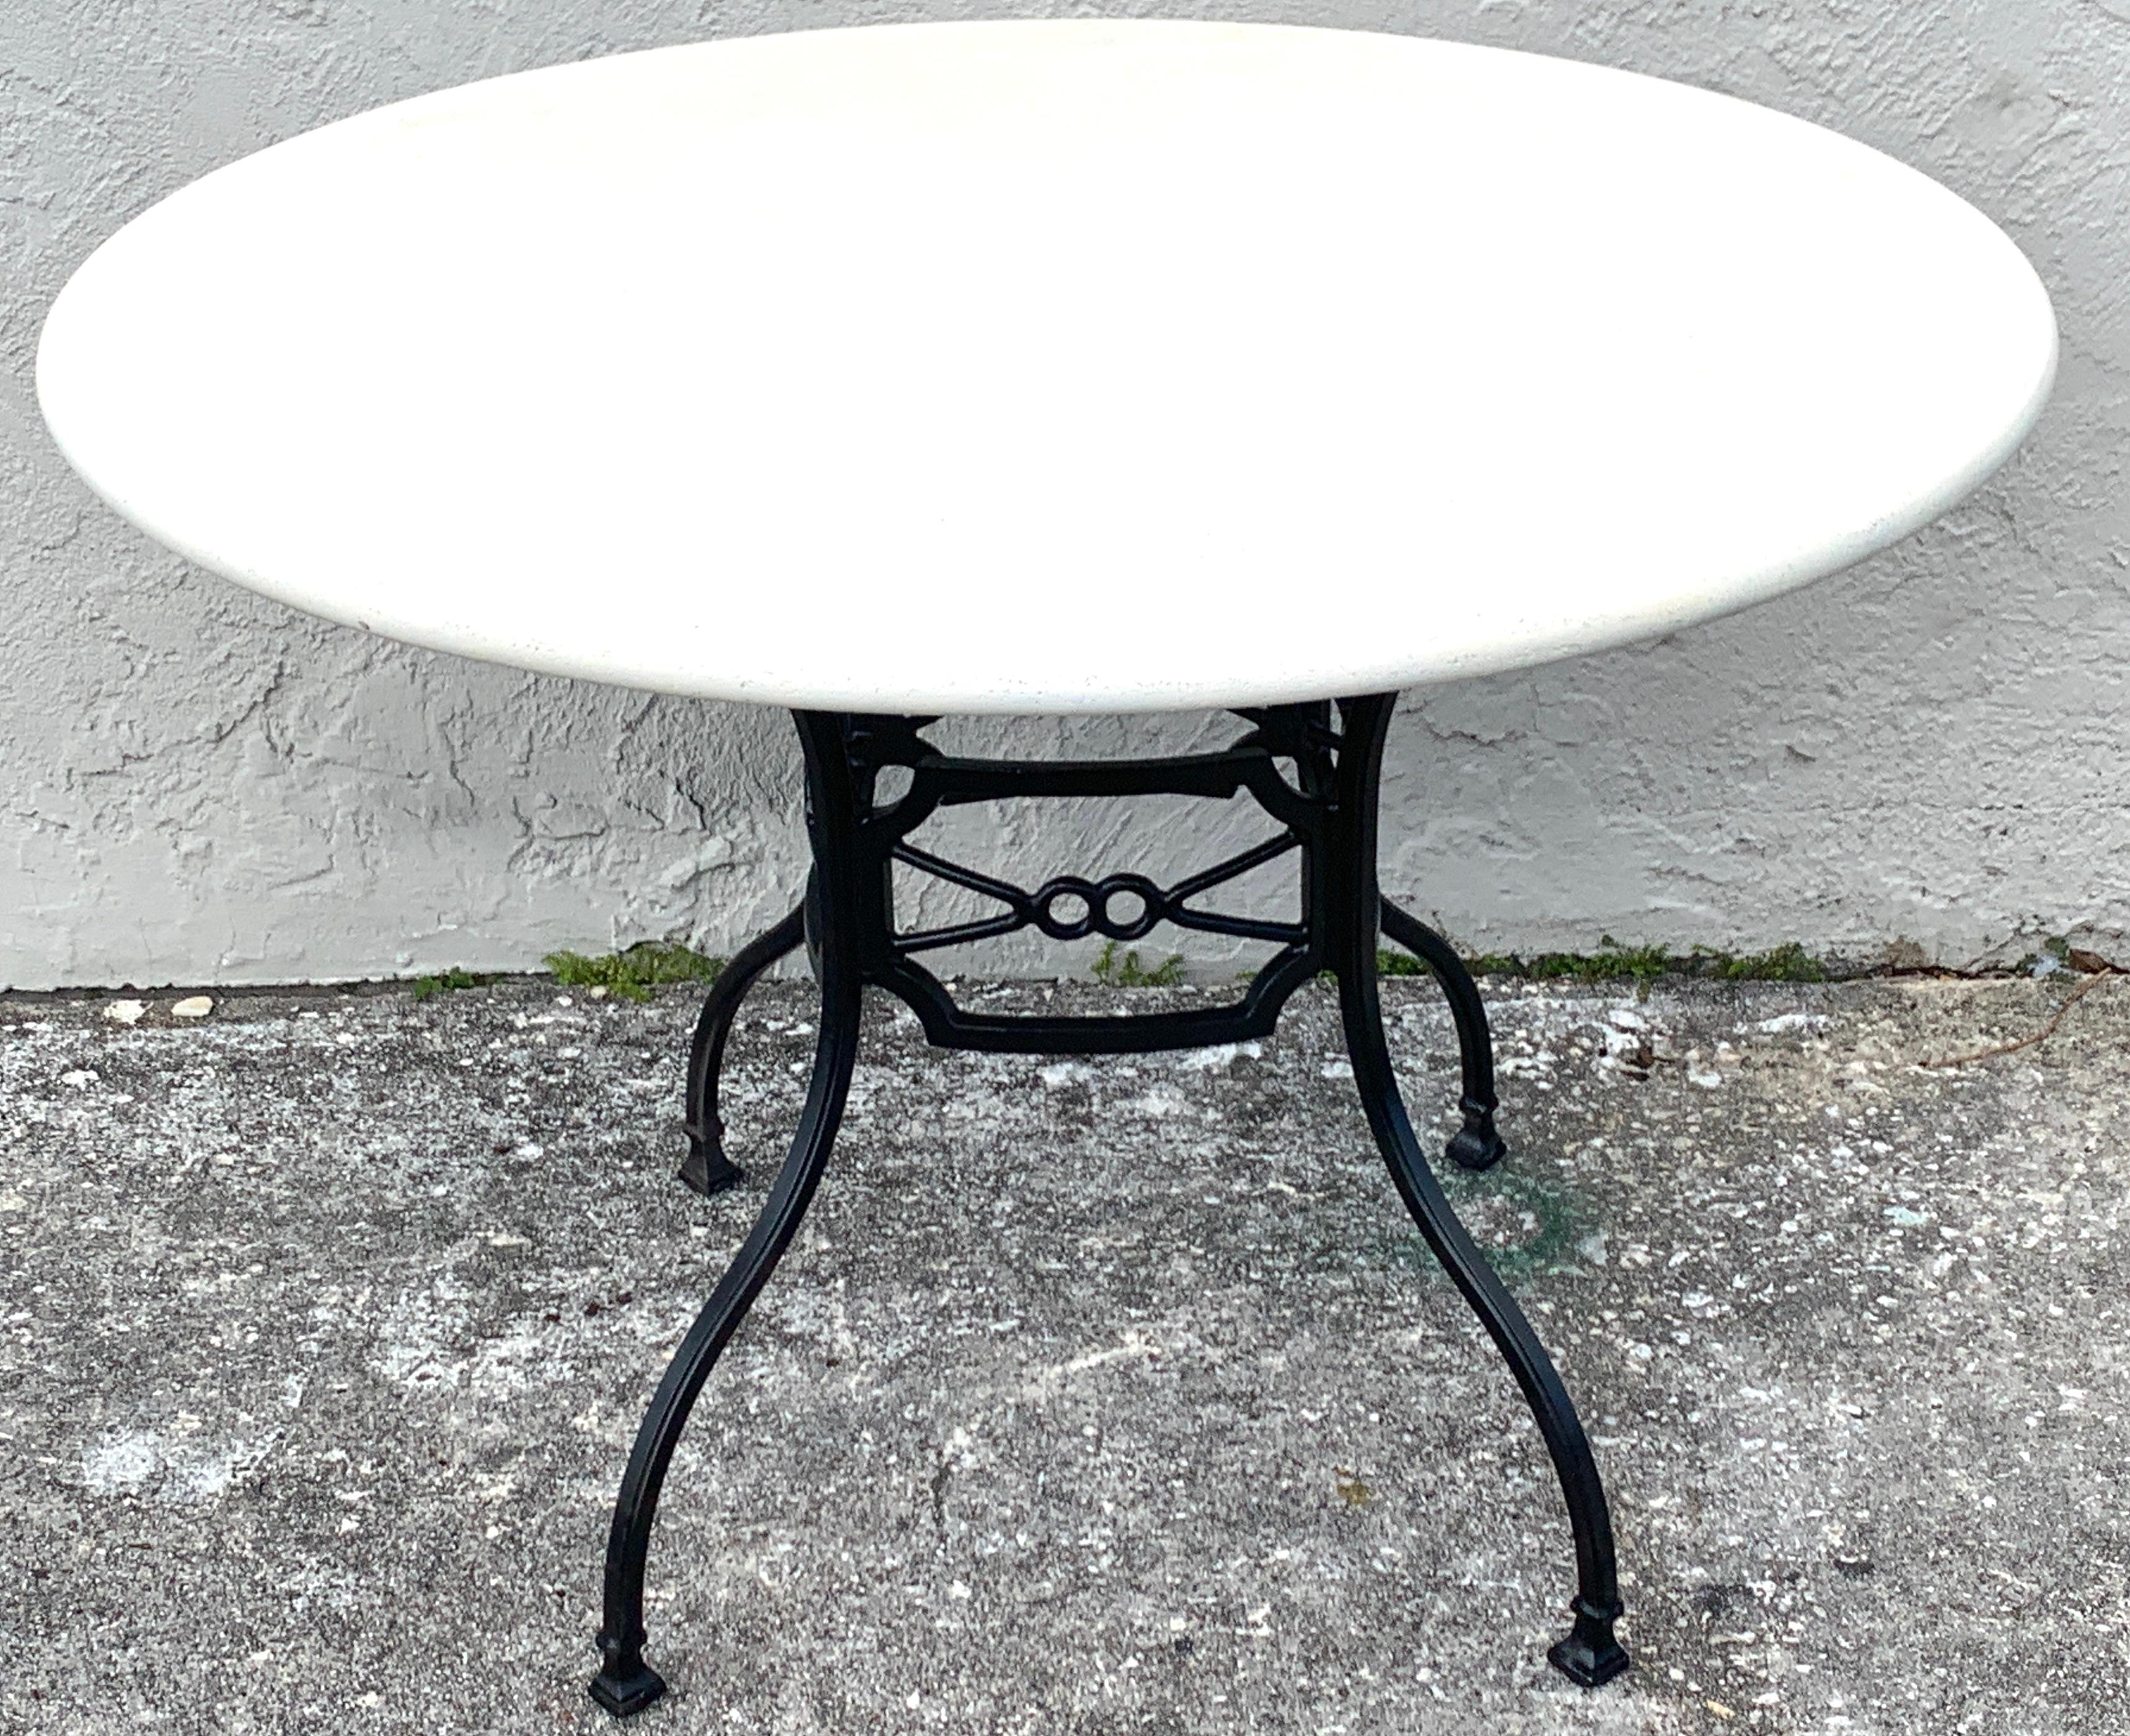 Painted Neoclassical Horse-Bit & Travertine Garden/Patio Table Provenance Celine Dion For Sale